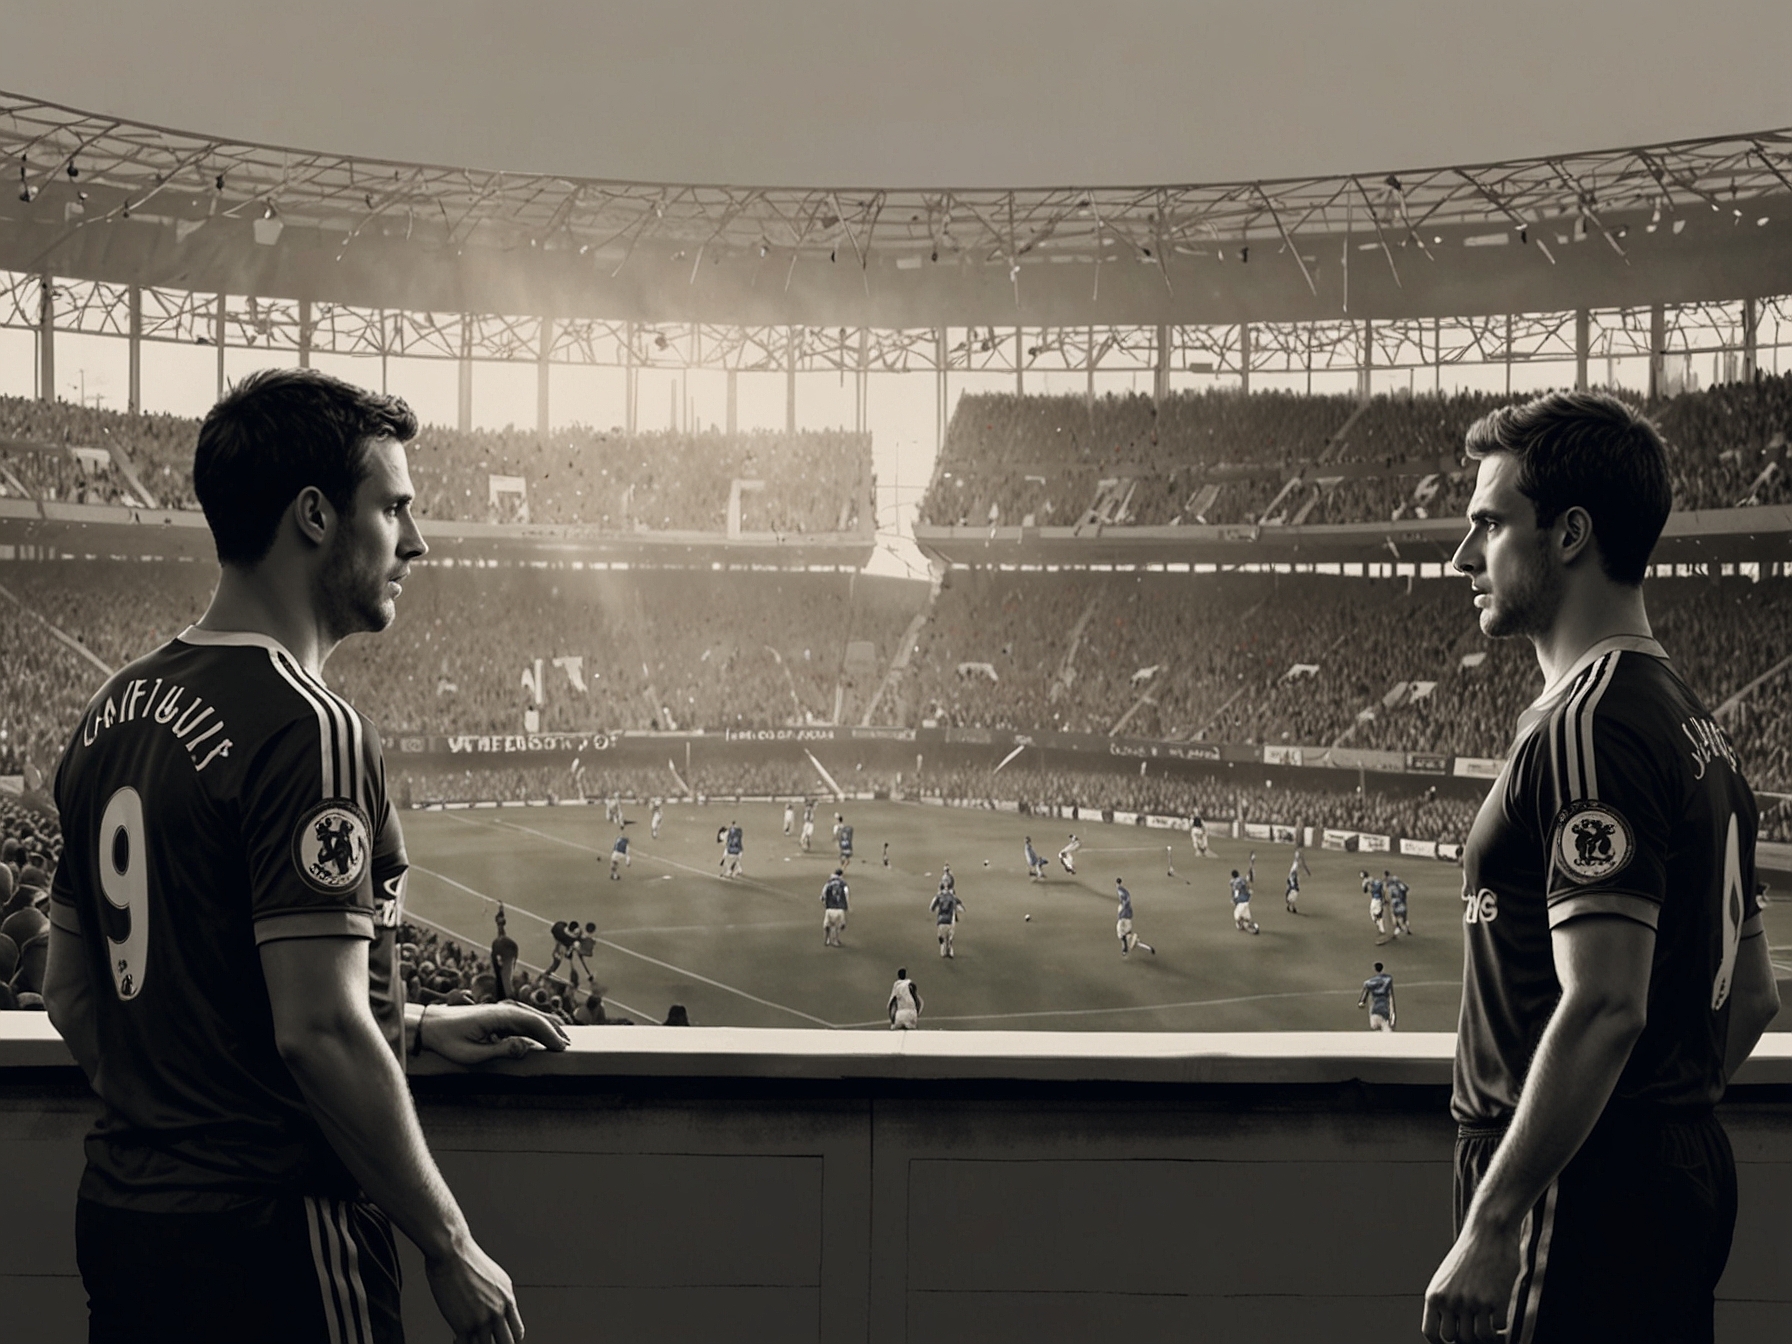 An illustration showcasing a tense football match between Chelsea and Manchester United, emphasizing betting tips like 'Both Teams to Score' and 'Under 2.5 Goals'.